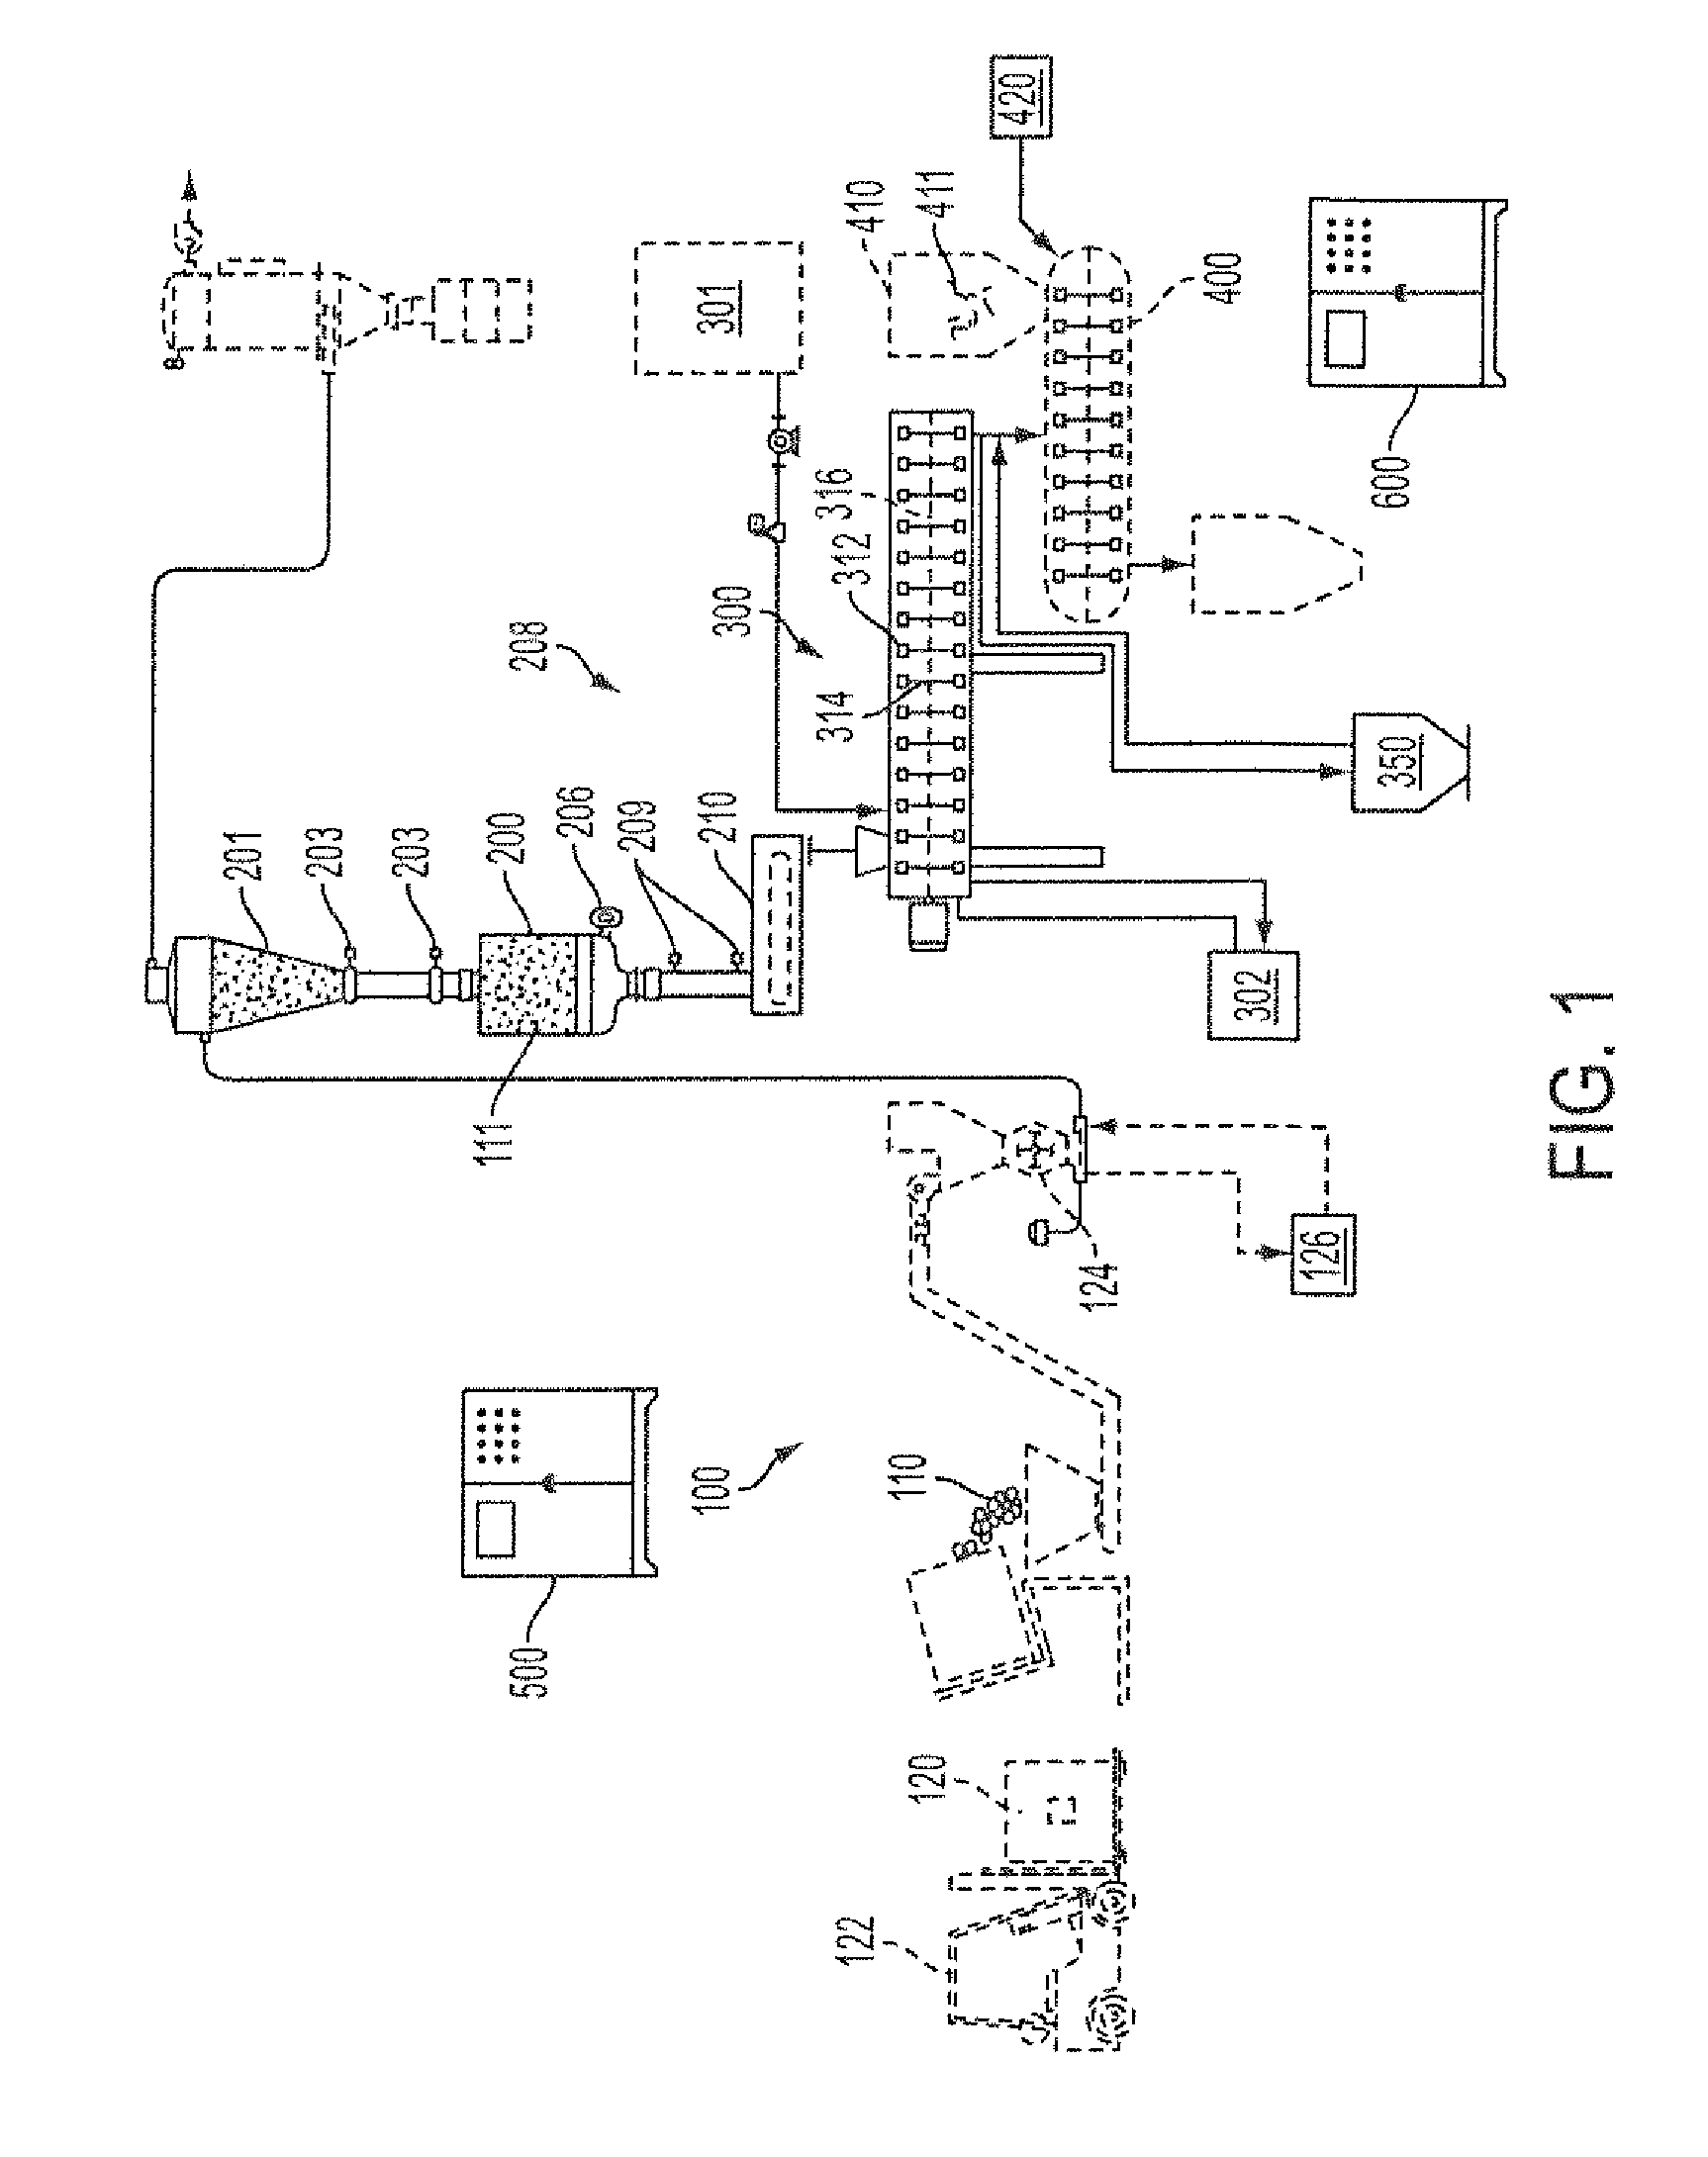 System and method for continuous processing of recyclable material